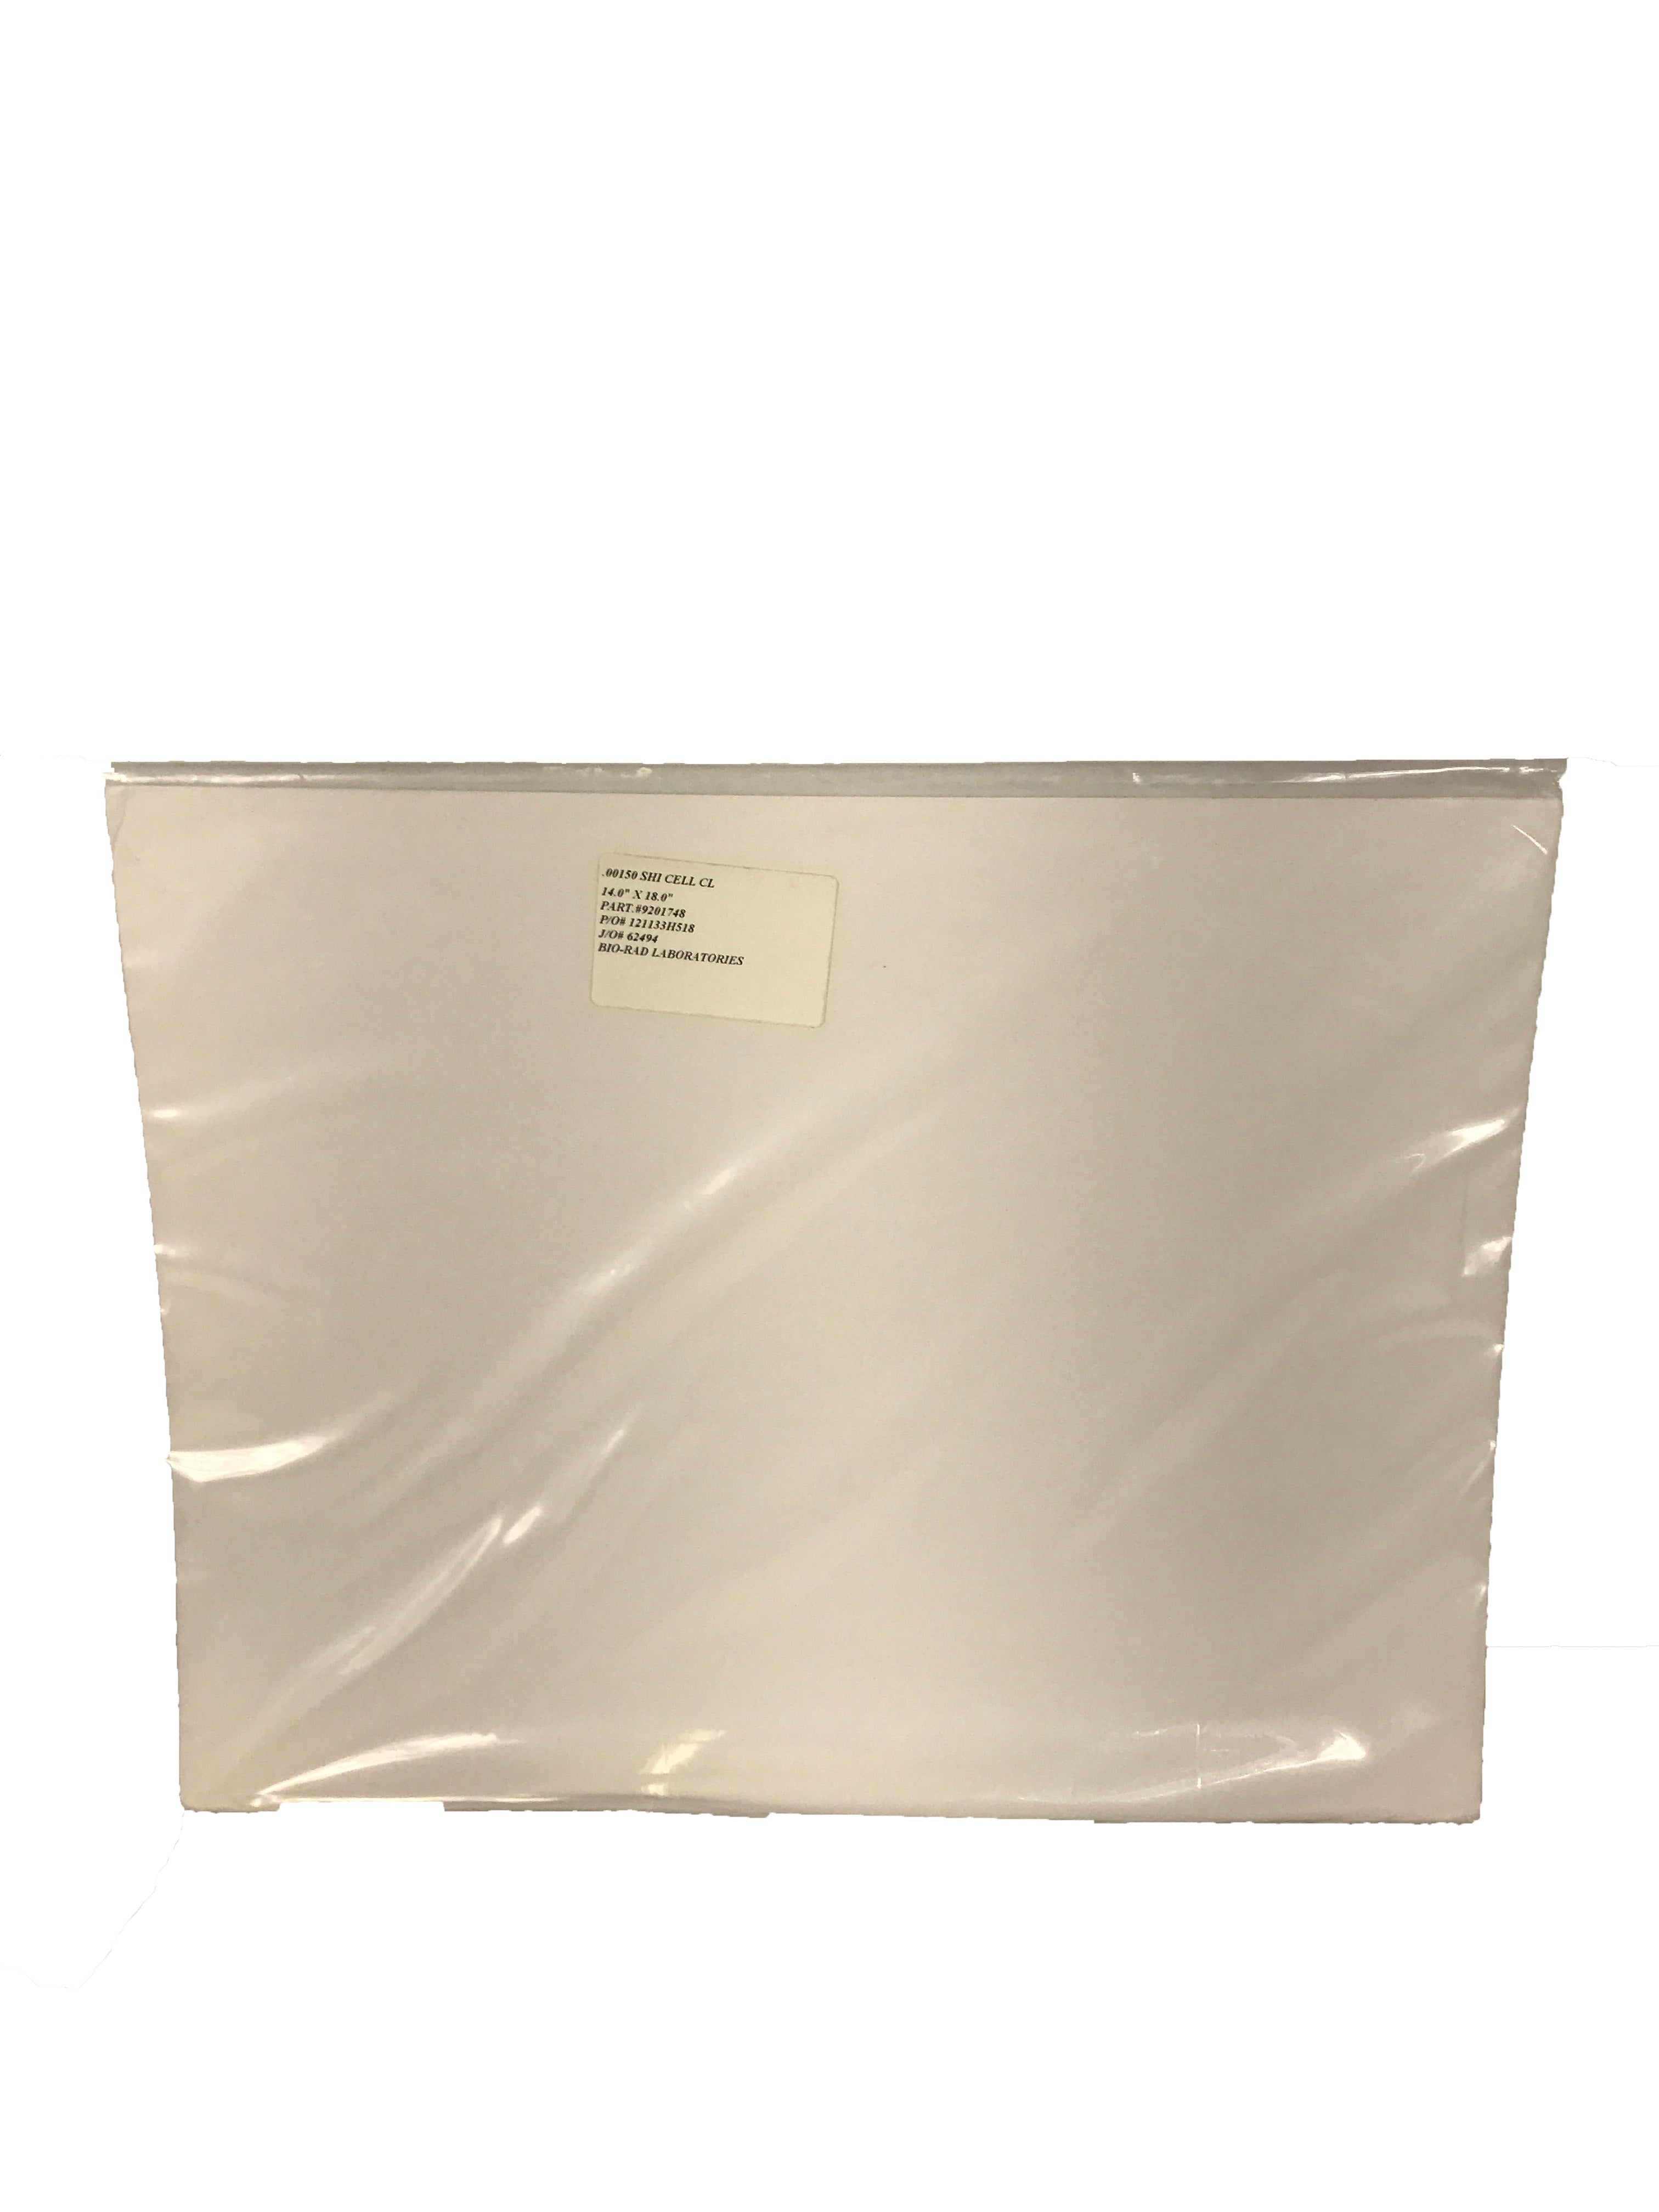 Sealed Package Bio-Rad .00150 SHI CELL CL 14" x 18" Filter Paper